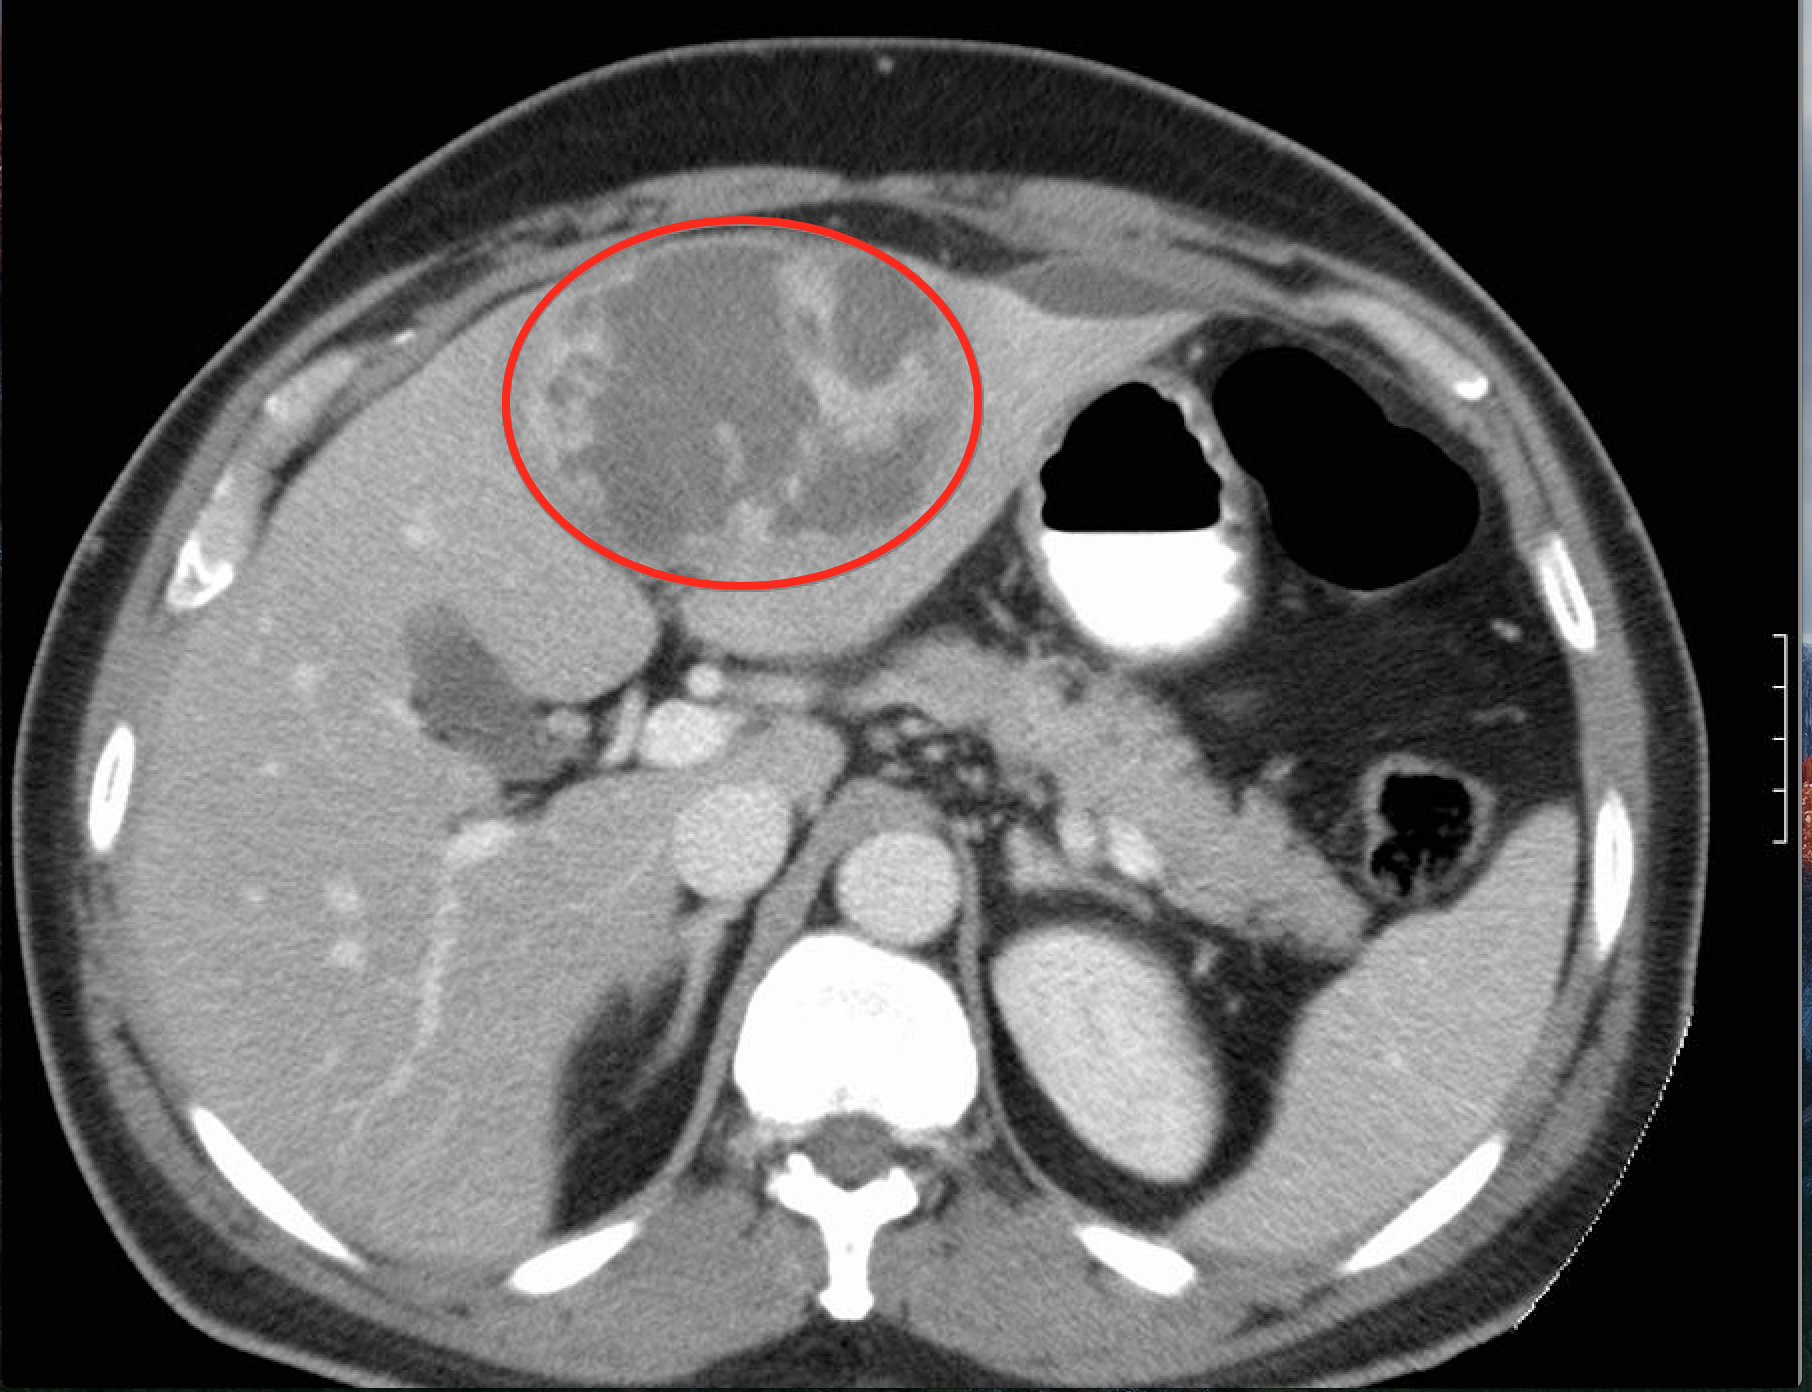 Hepatic abscess seen on a CT scan in a patient with amebiasis (source)